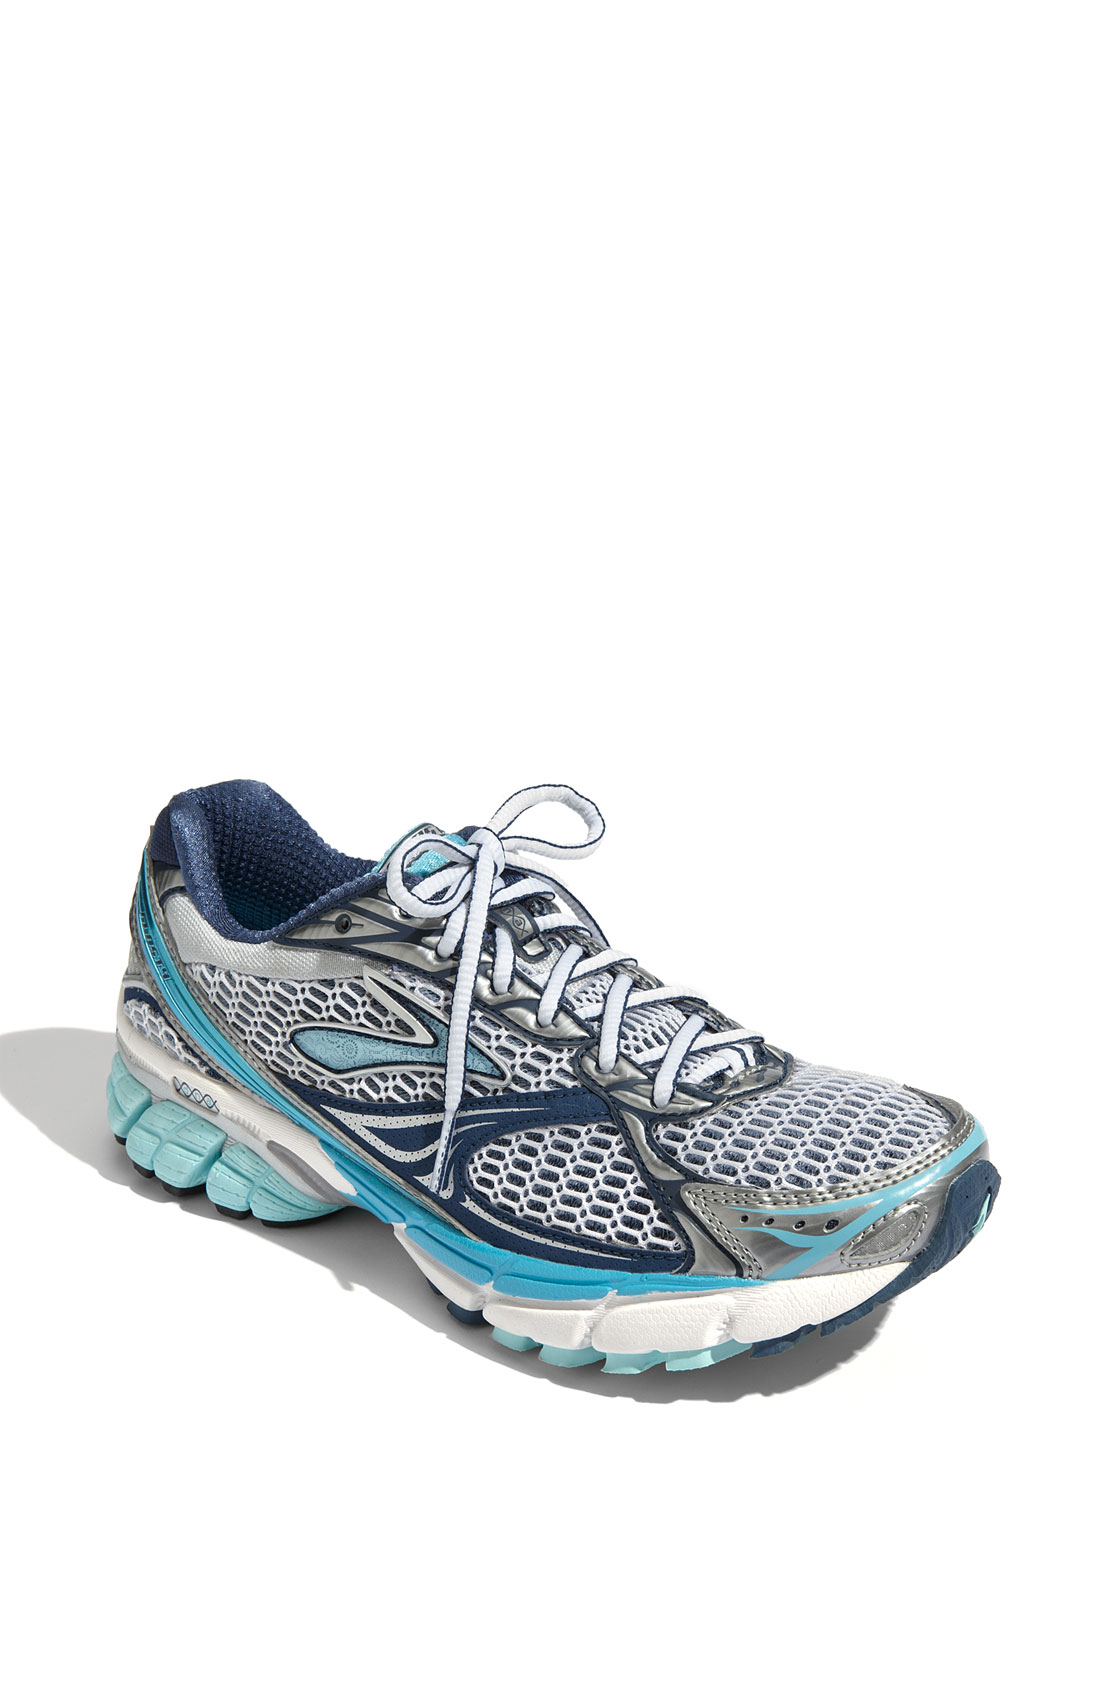 66 Limited Edition Brooks ghost 4 running shoes for Women